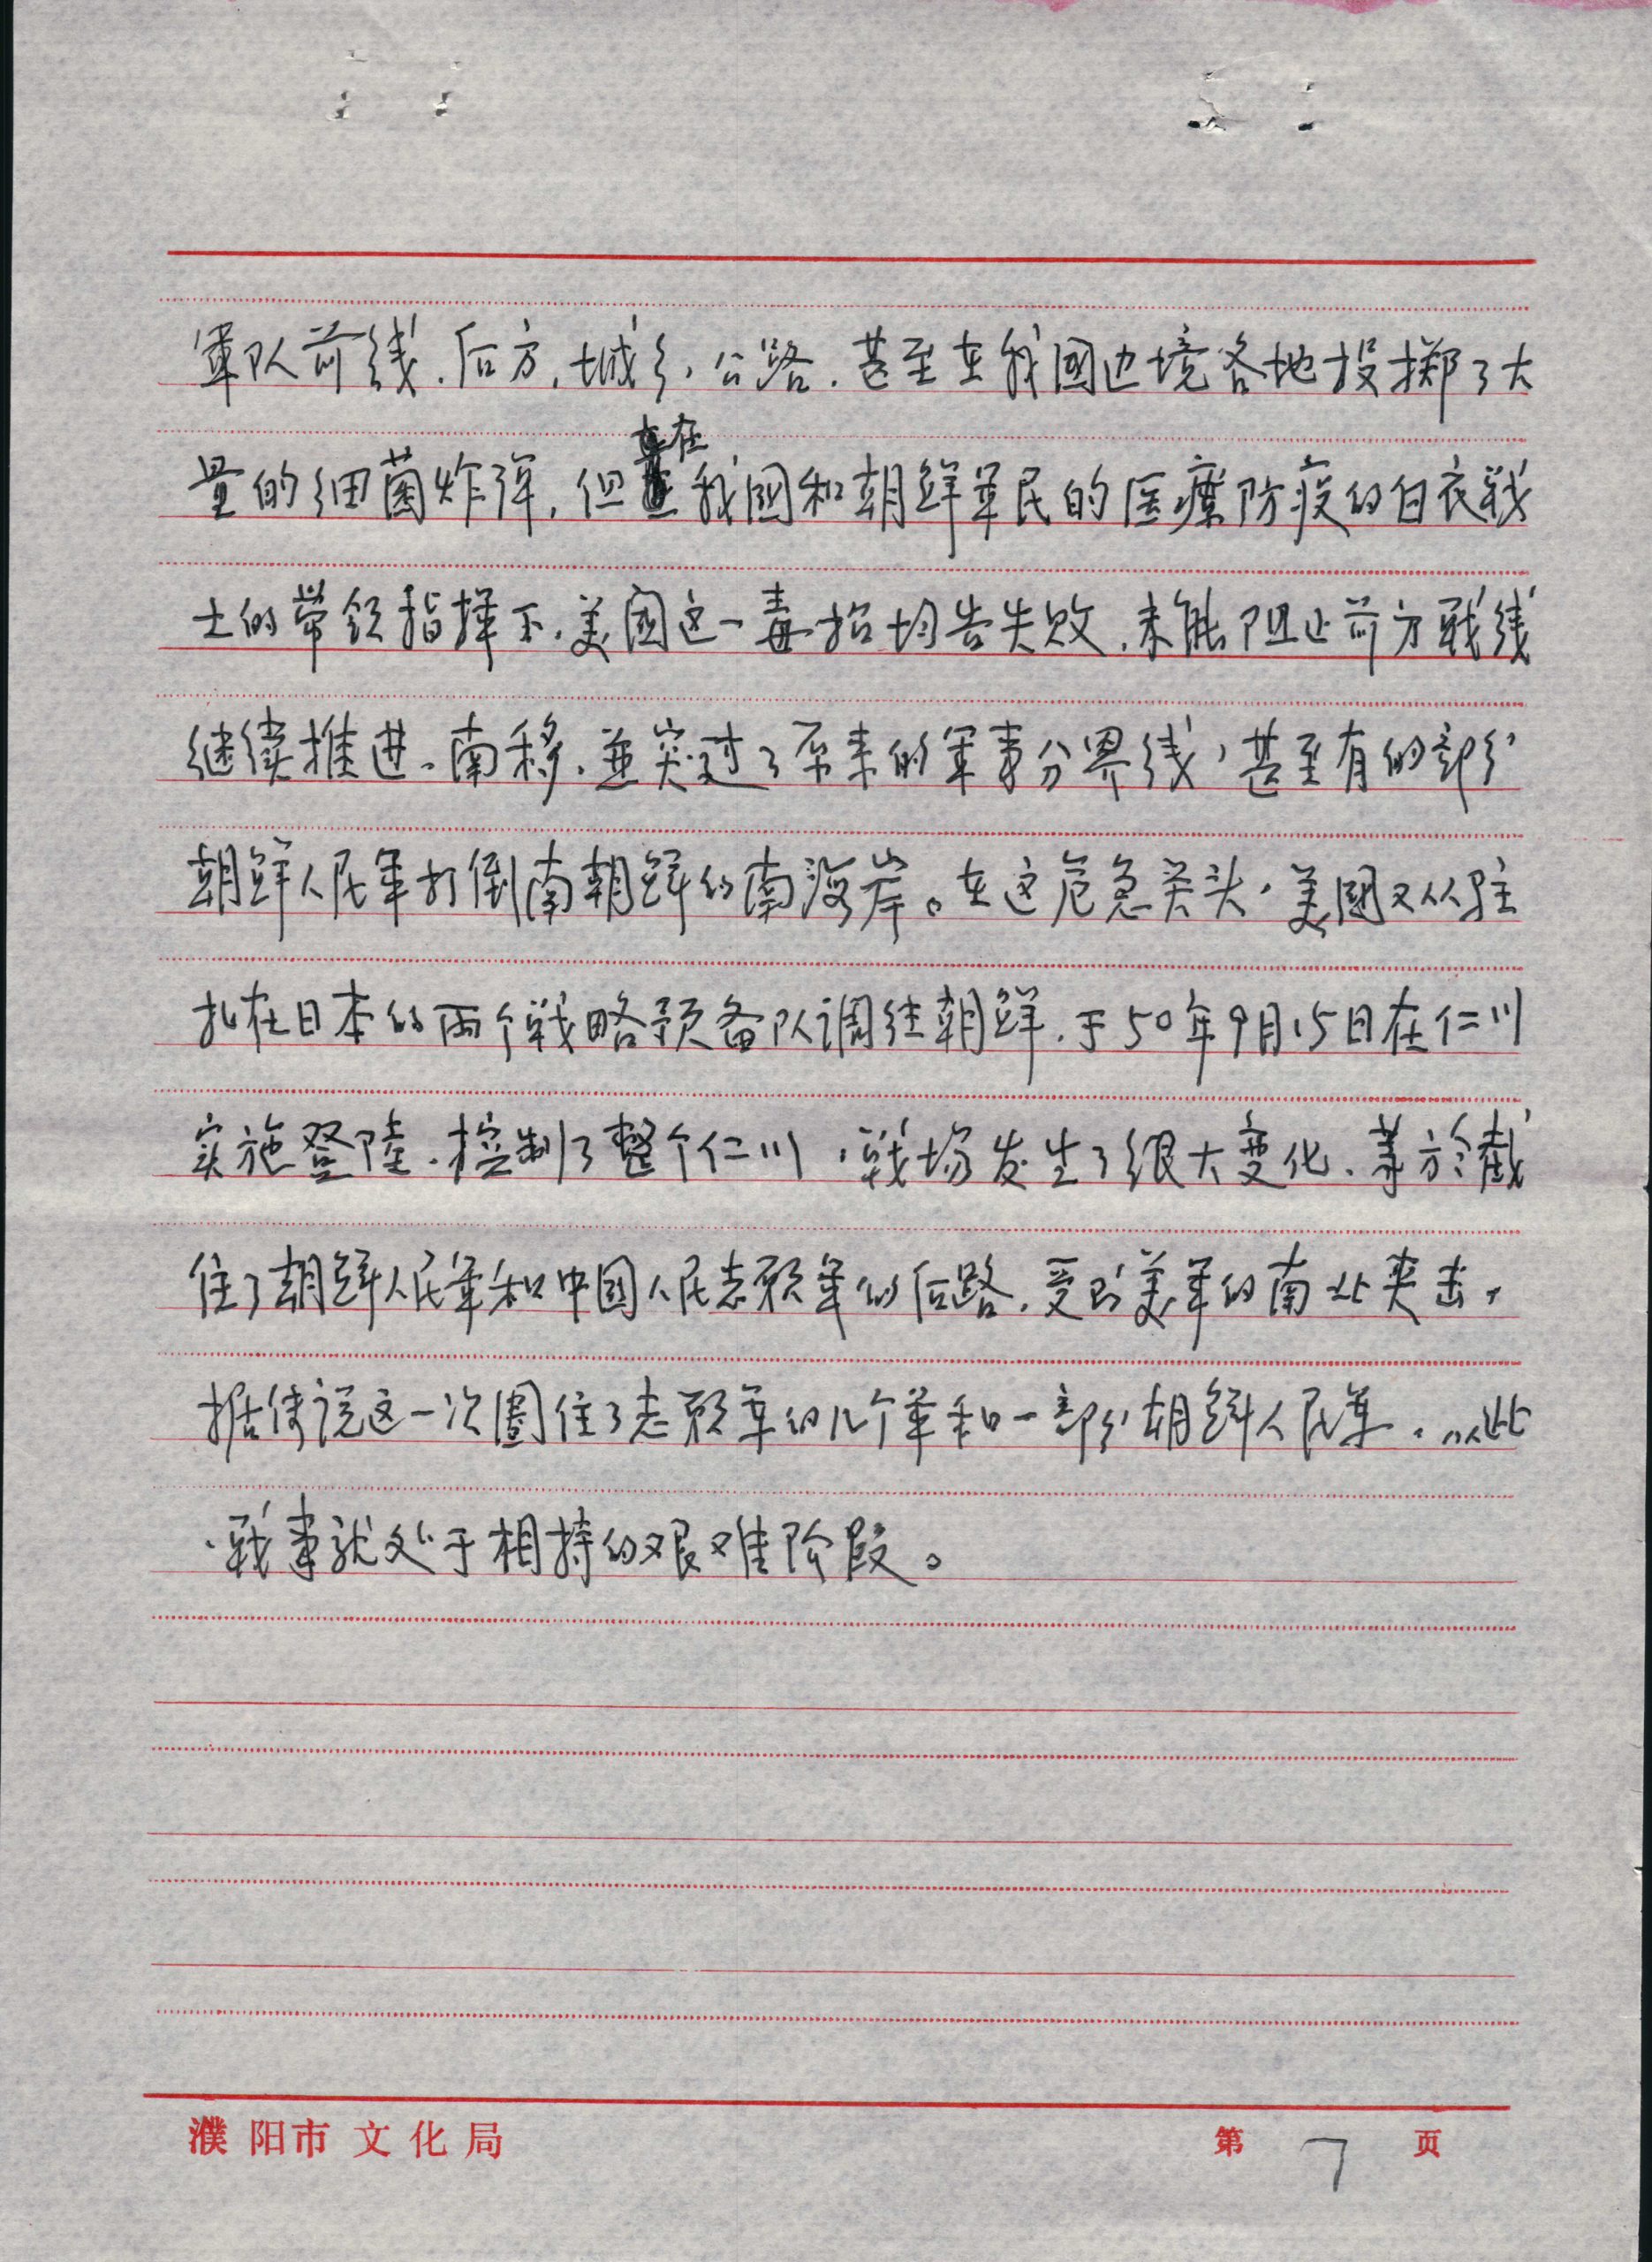 The seventh page of the written history of Yang Kwang Tan, who took part in the Korean War as part of the Chinese Army. Tan's niece listened to one of Dr. Han's seminars on the Korean Peninsula and thus asked her father to write about Tan's service. 